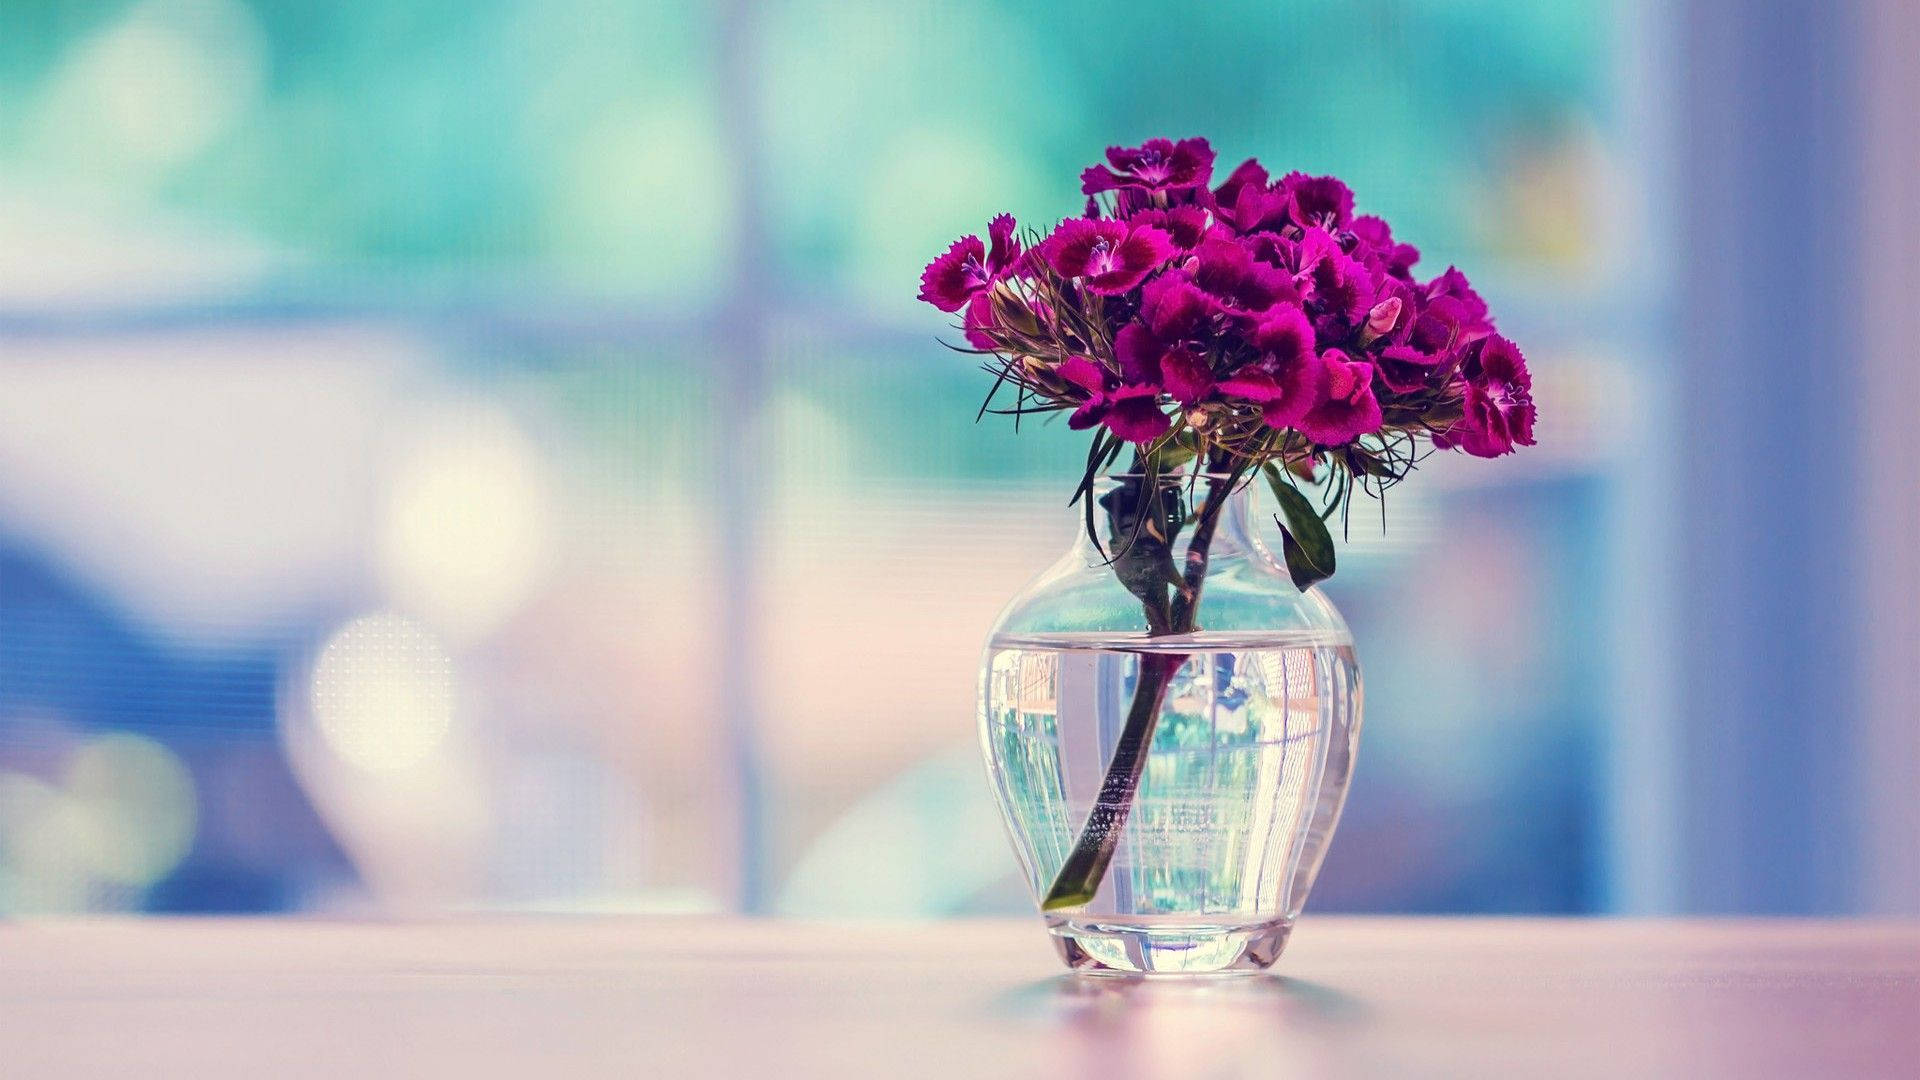 Beautiful Hd Flowers In A Vase Background